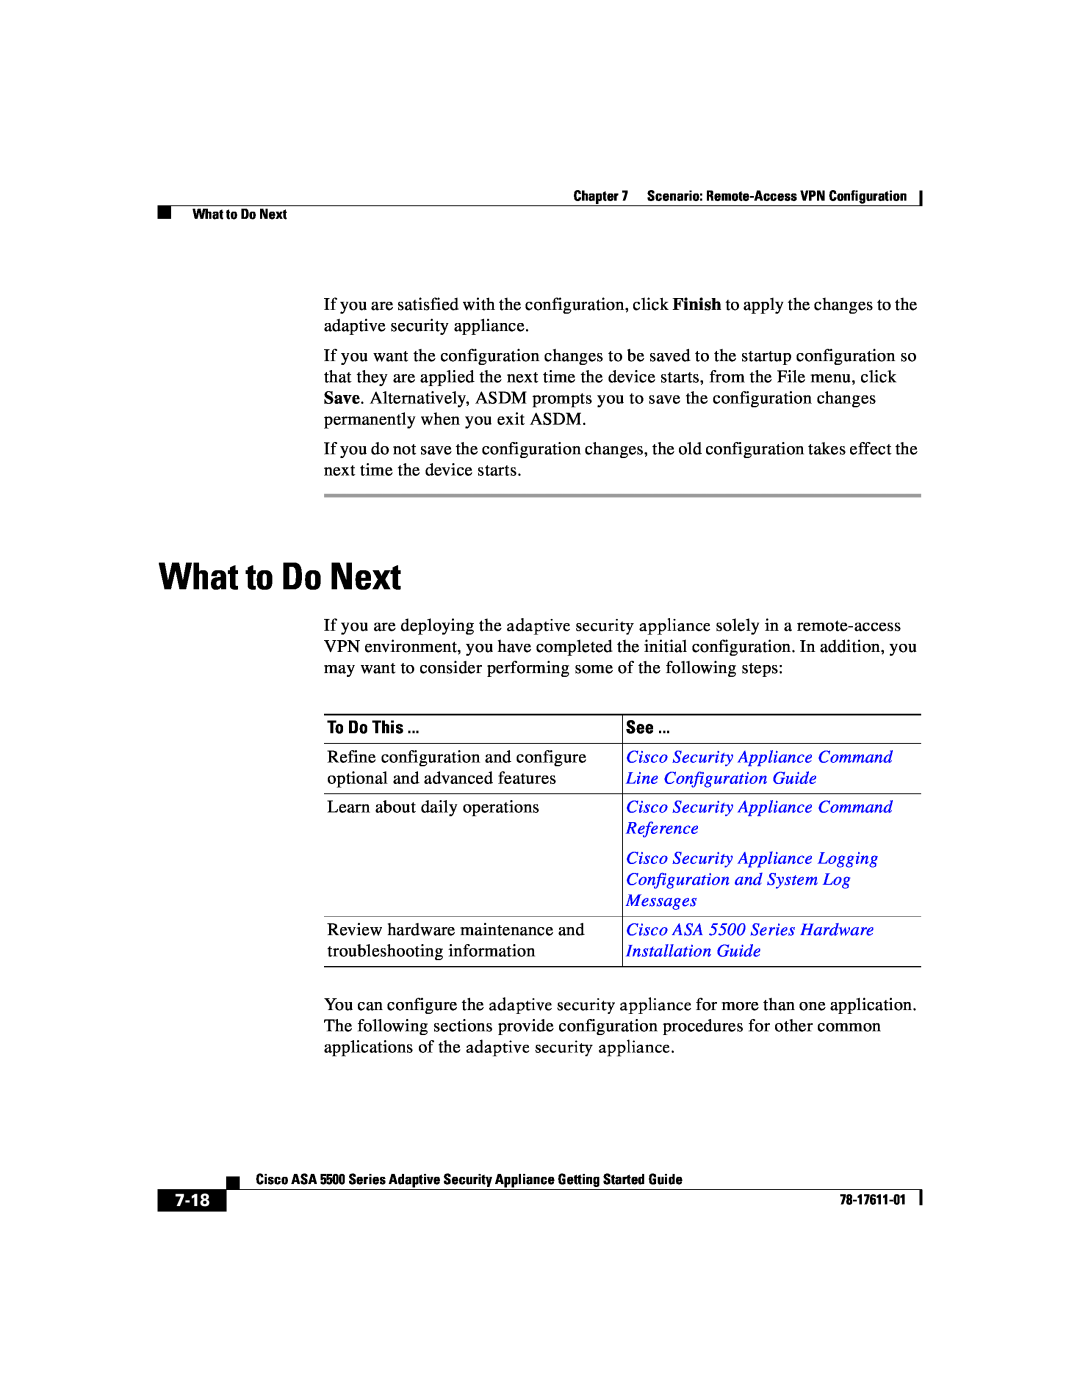 Cisco Systems ASA 5500 manual What to Do Next, To Do This, 7-18 